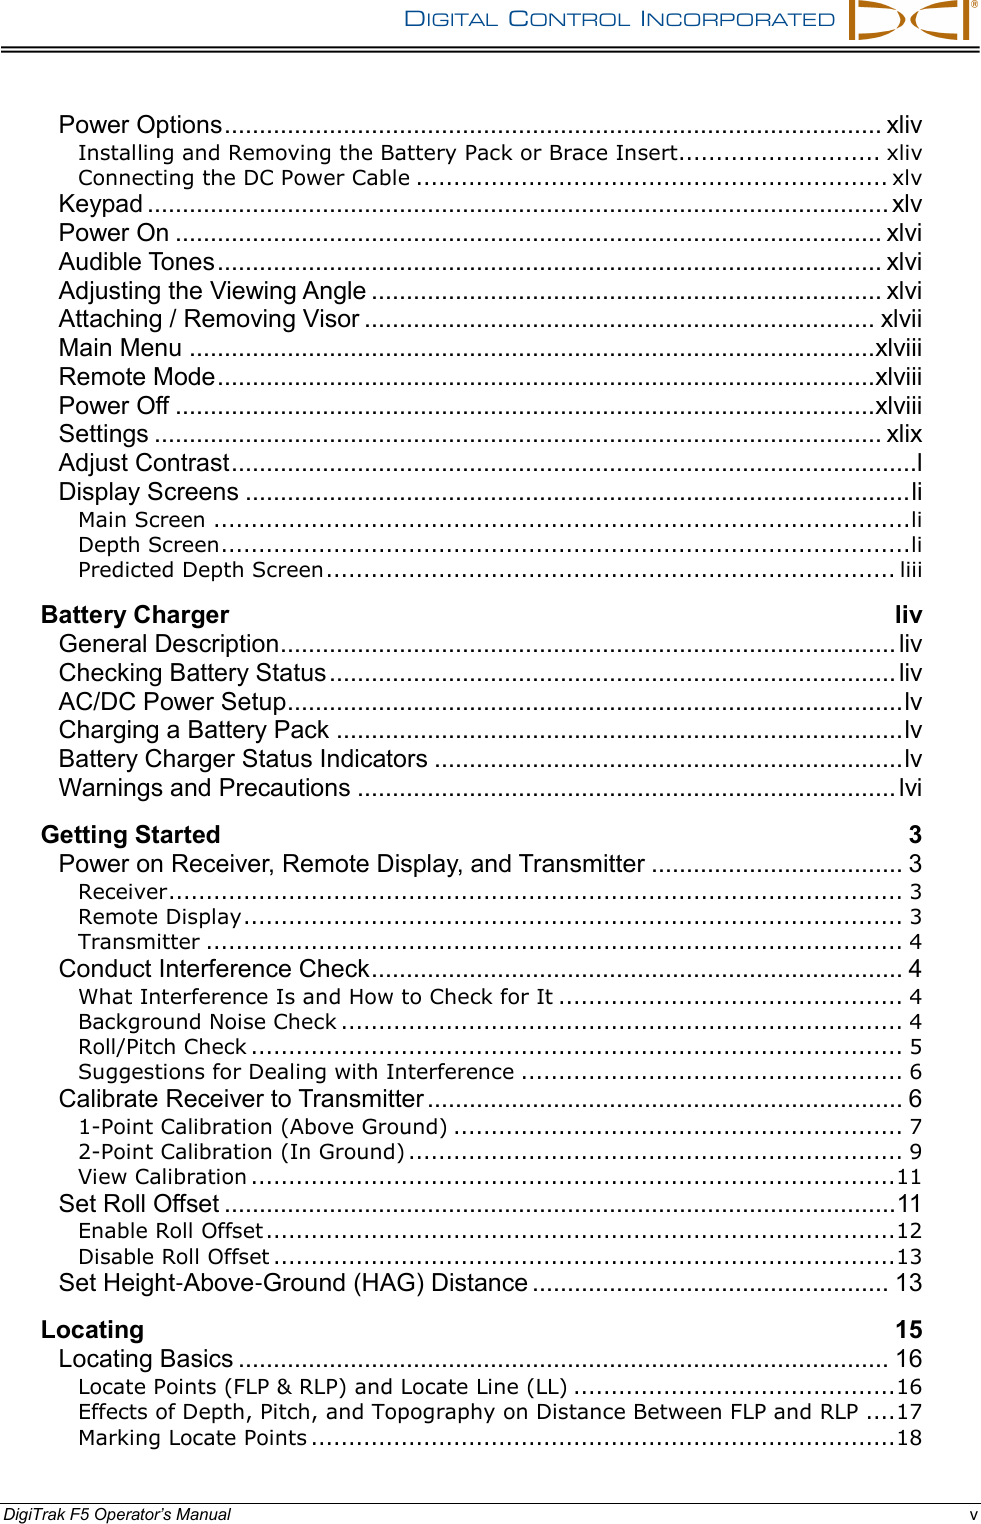 DIGITAL  CONTROL  INCORPORATED      DigiTrak F5 Operator’s Manual v Power Options .............................................................................................. xliv Installing and Removing the Battery Pack or Brace Insert........................... xliv Connecting the DC Power Cable ............................................................... xlv Keypad .......................................................................................................... xlv Power On ..................................................................................................... xlvi Audible Tones ............................................................................................... xlvi Adjusting the Viewing Angle ......................................................................... xlvi Attaching / Removing Visor ......................................................................... xlvii Main Menu .................................................................................................. xlviii Remote Mode .............................................................................................. xlviii Power Off .................................................................................................... xlviii Settings ........................................................................................................ xlix Adjust Contrast ..................................................................................................l Display Screens ............................................................................................... li Main Screen ............................................................................................. li Depth Screen ............................................................................................ li Predicted Depth Screen ............................................................................ liii Battery Charger liv General Description ........................................................................................ liv Checking Battery Status ................................................................................. liv AC/DC Power Setup ........................................................................................ lv Charging a Battery Pack ................................................................................. lv Battery Charger Status Indicators ................................................................... lv Warnings and Precautions ............................................................................. lvi Getting Started 3 Power on Receiver, Remote Display, and Transmitter .................................... 3 Receiver .................................................................................................. 3 Remote Display ........................................................................................ 3 Transmitter ............................................................................................. 4 Conduct Interference Check ............................................................................ 4 What Interference Is and How to Check for It .............................................. 4 Background Noise Check ........................................................................... 4 Roll/Pitch Check ....................................................................................... 5 Suggestions for Dealing with Interference ................................................... 6 Calibrate Receiver to Transmitter .................................................................... 6 1-Point Calibration (Above Ground) ............................................................ 7 2-Point Calibration (In Ground) .................................................................. 9 View Calibration ...................................................................................... 11 Set Roll Offset ................................................................................................ 11 Enable Roll Offset .................................................................................... 12 Disable Roll Offset ................................................................................... 13 Set Height-Above-Ground (HAG) Distance ................................................... 13 Locating 15 Locating Basics ............................................................................................. 16 Locate Points (FLP &amp; RLP) and Locate Line (LL) ........................................... 16 Effects of Depth, Pitch, and Topography on Distance Between FLP and RLP .... 17 Marking Locate Points .............................................................................. 18 